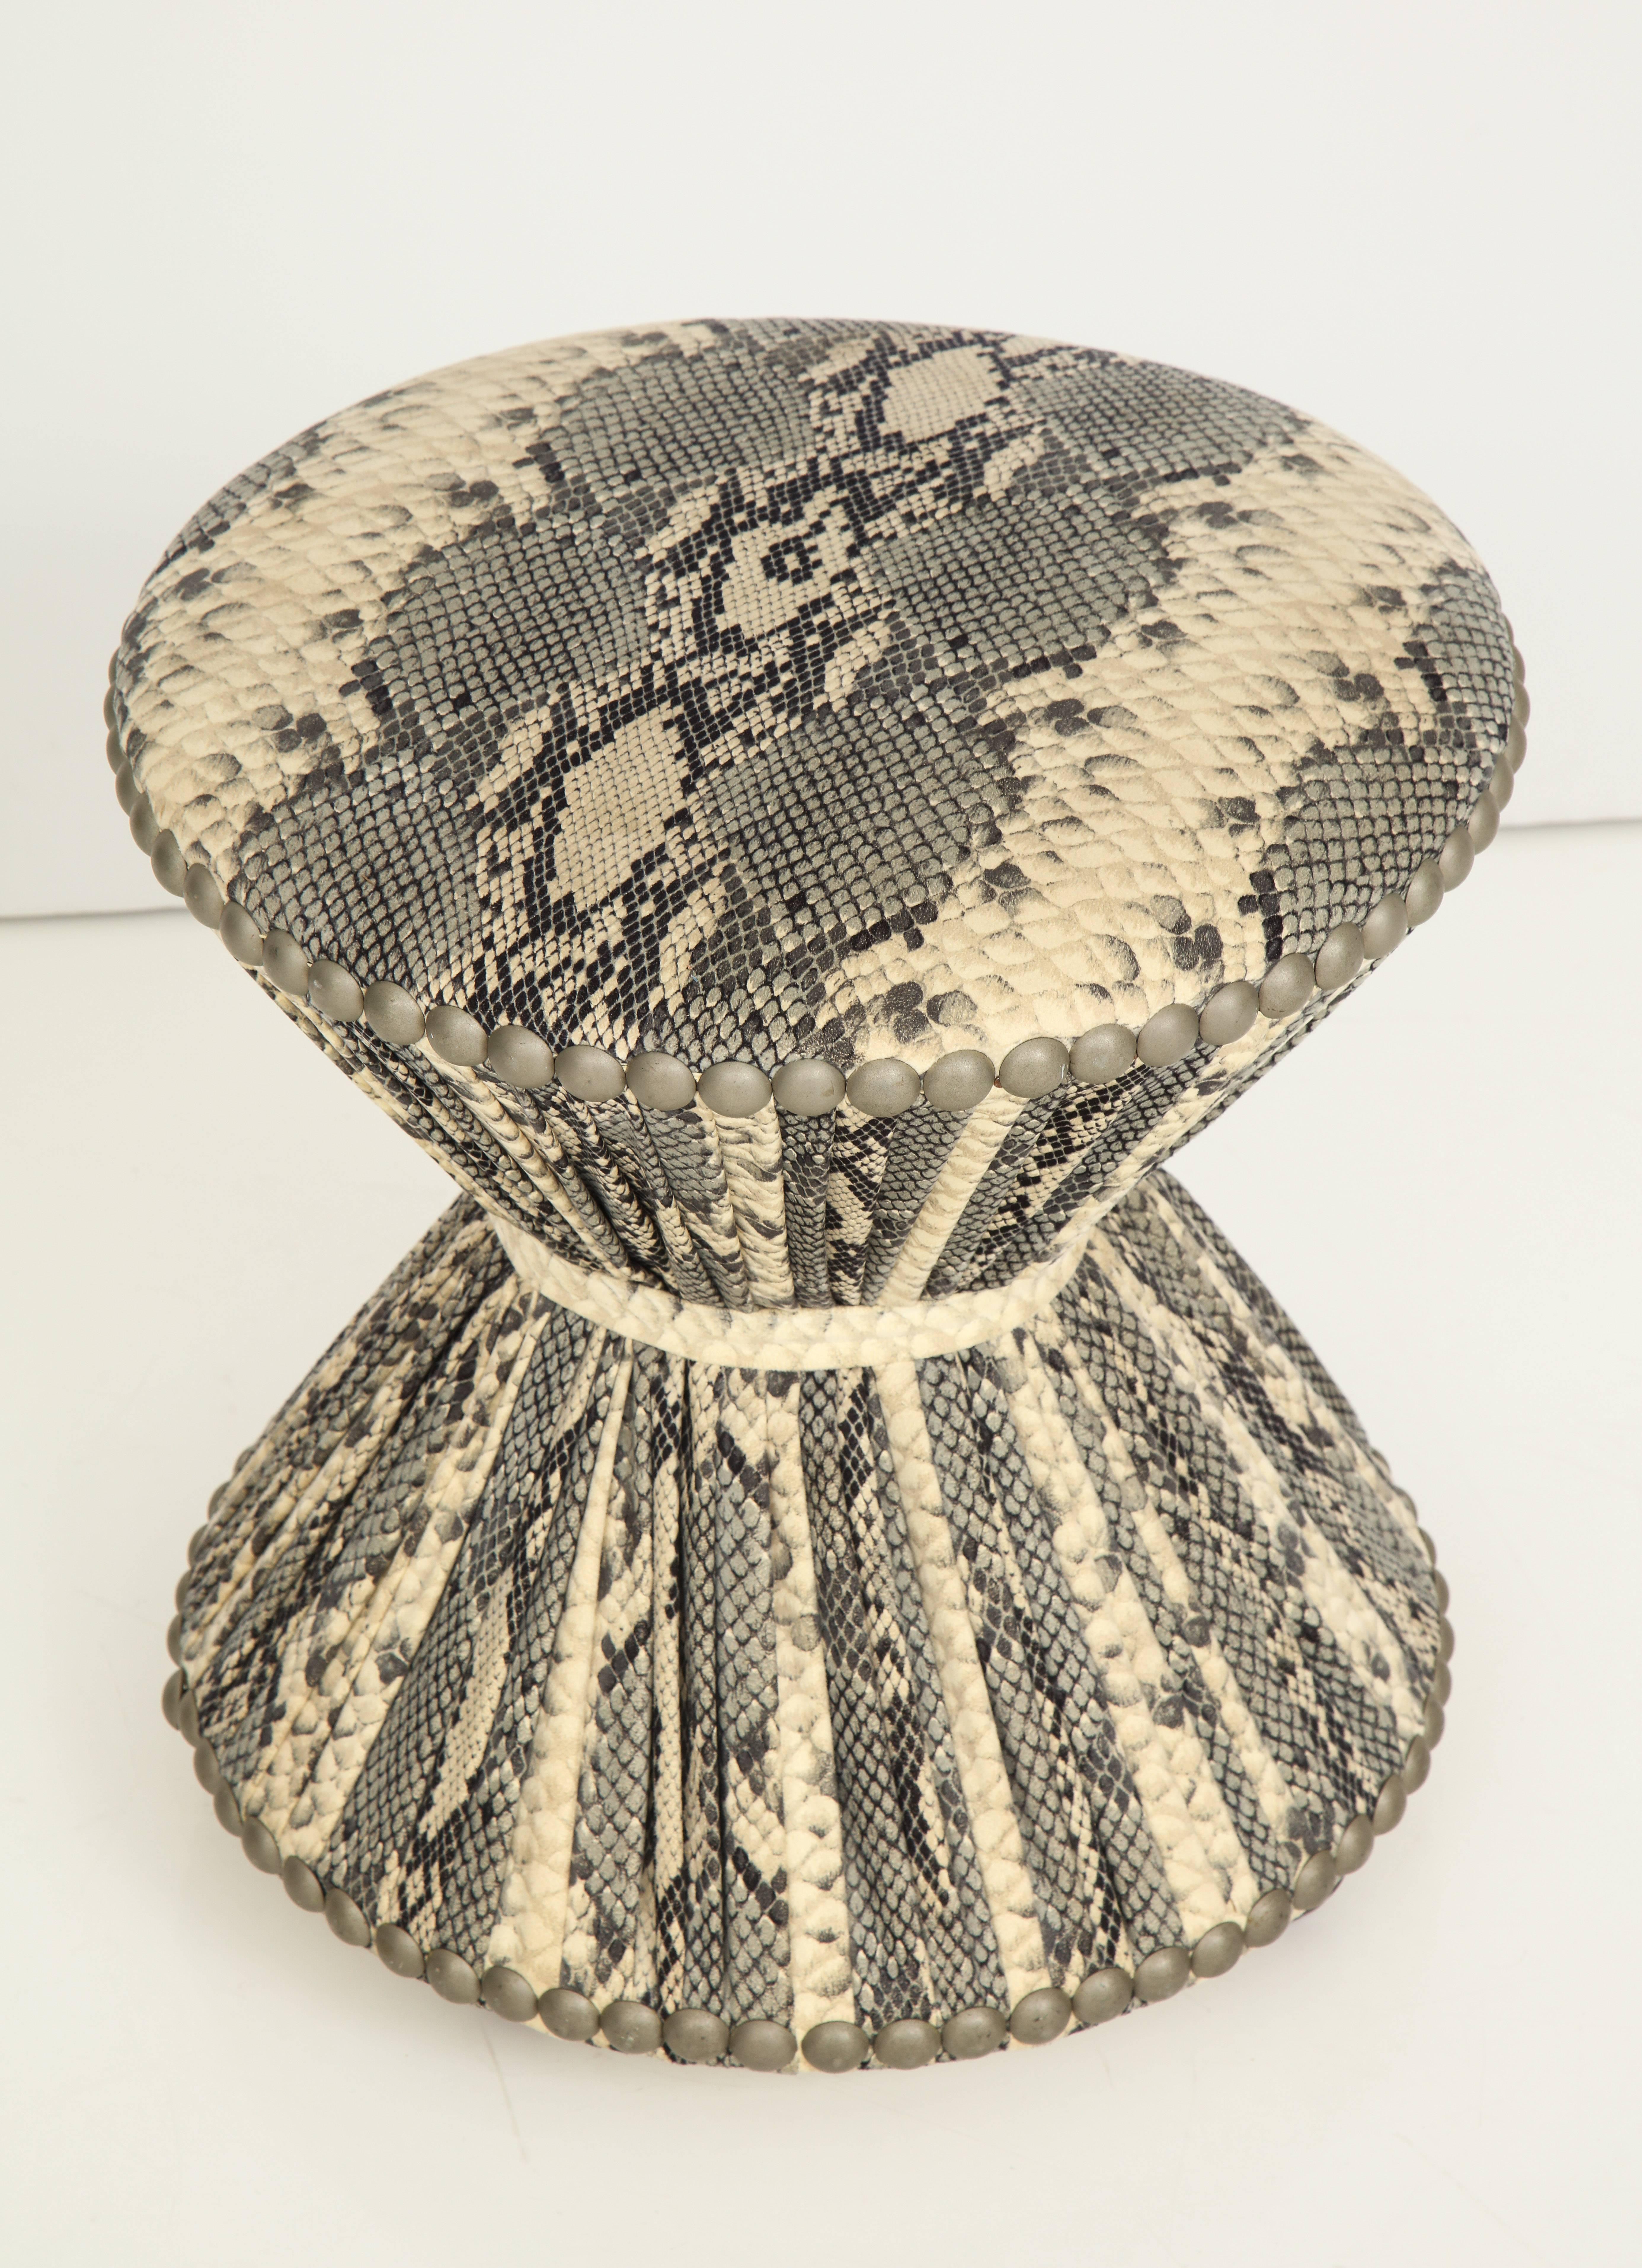 Snakeskin Printed Fabric Stool on Casters with Studded Trim 2